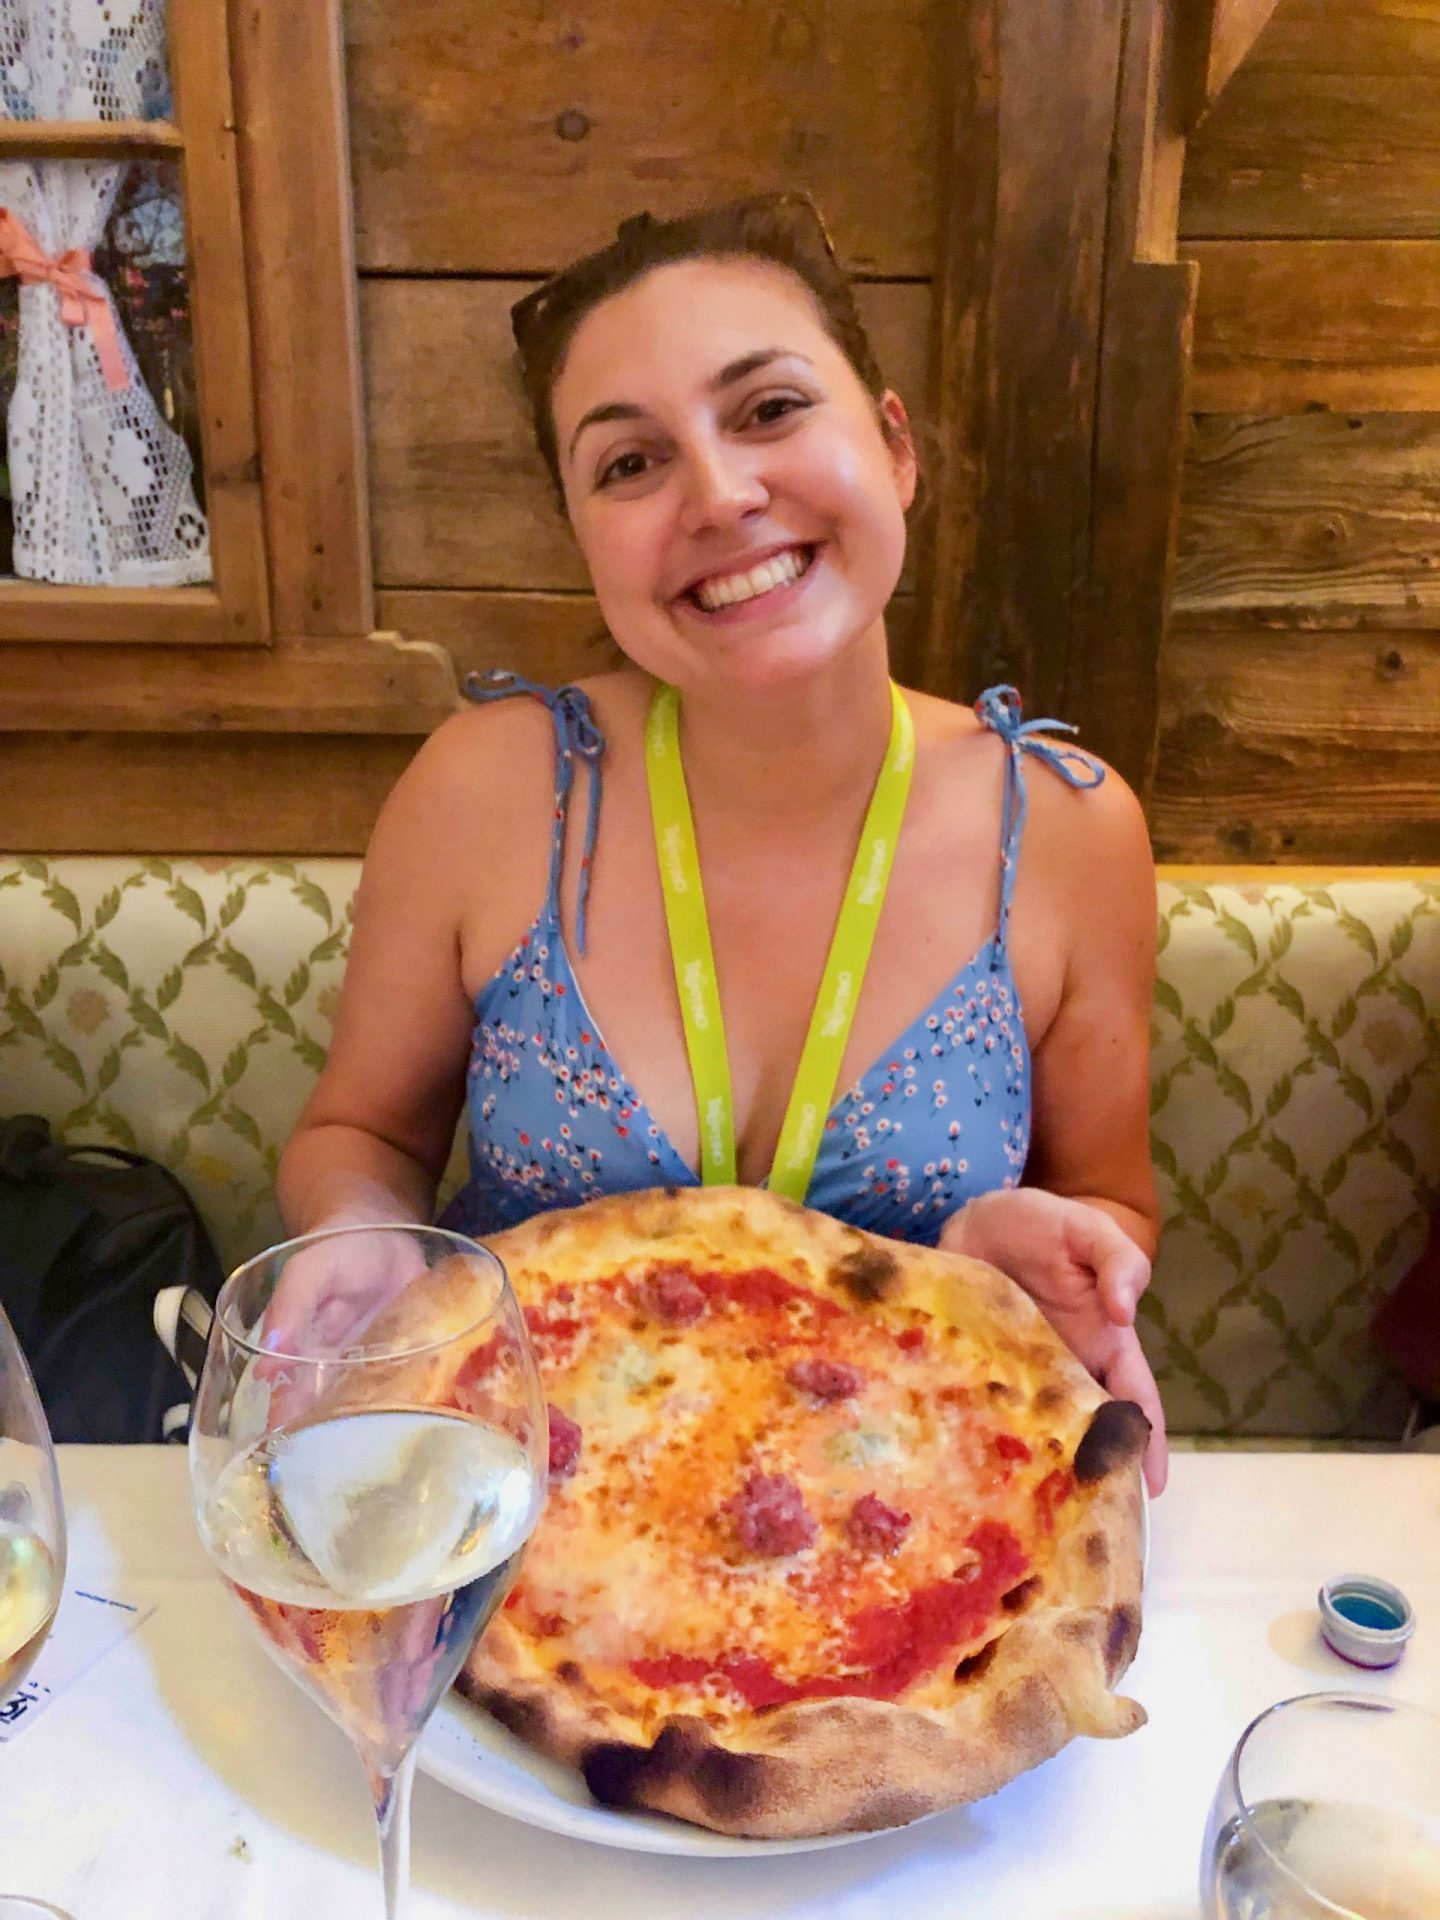 cheap european city break - Nell holding up a pizza and smiling at the camera, exploring the food and drink in Trento, Trentino